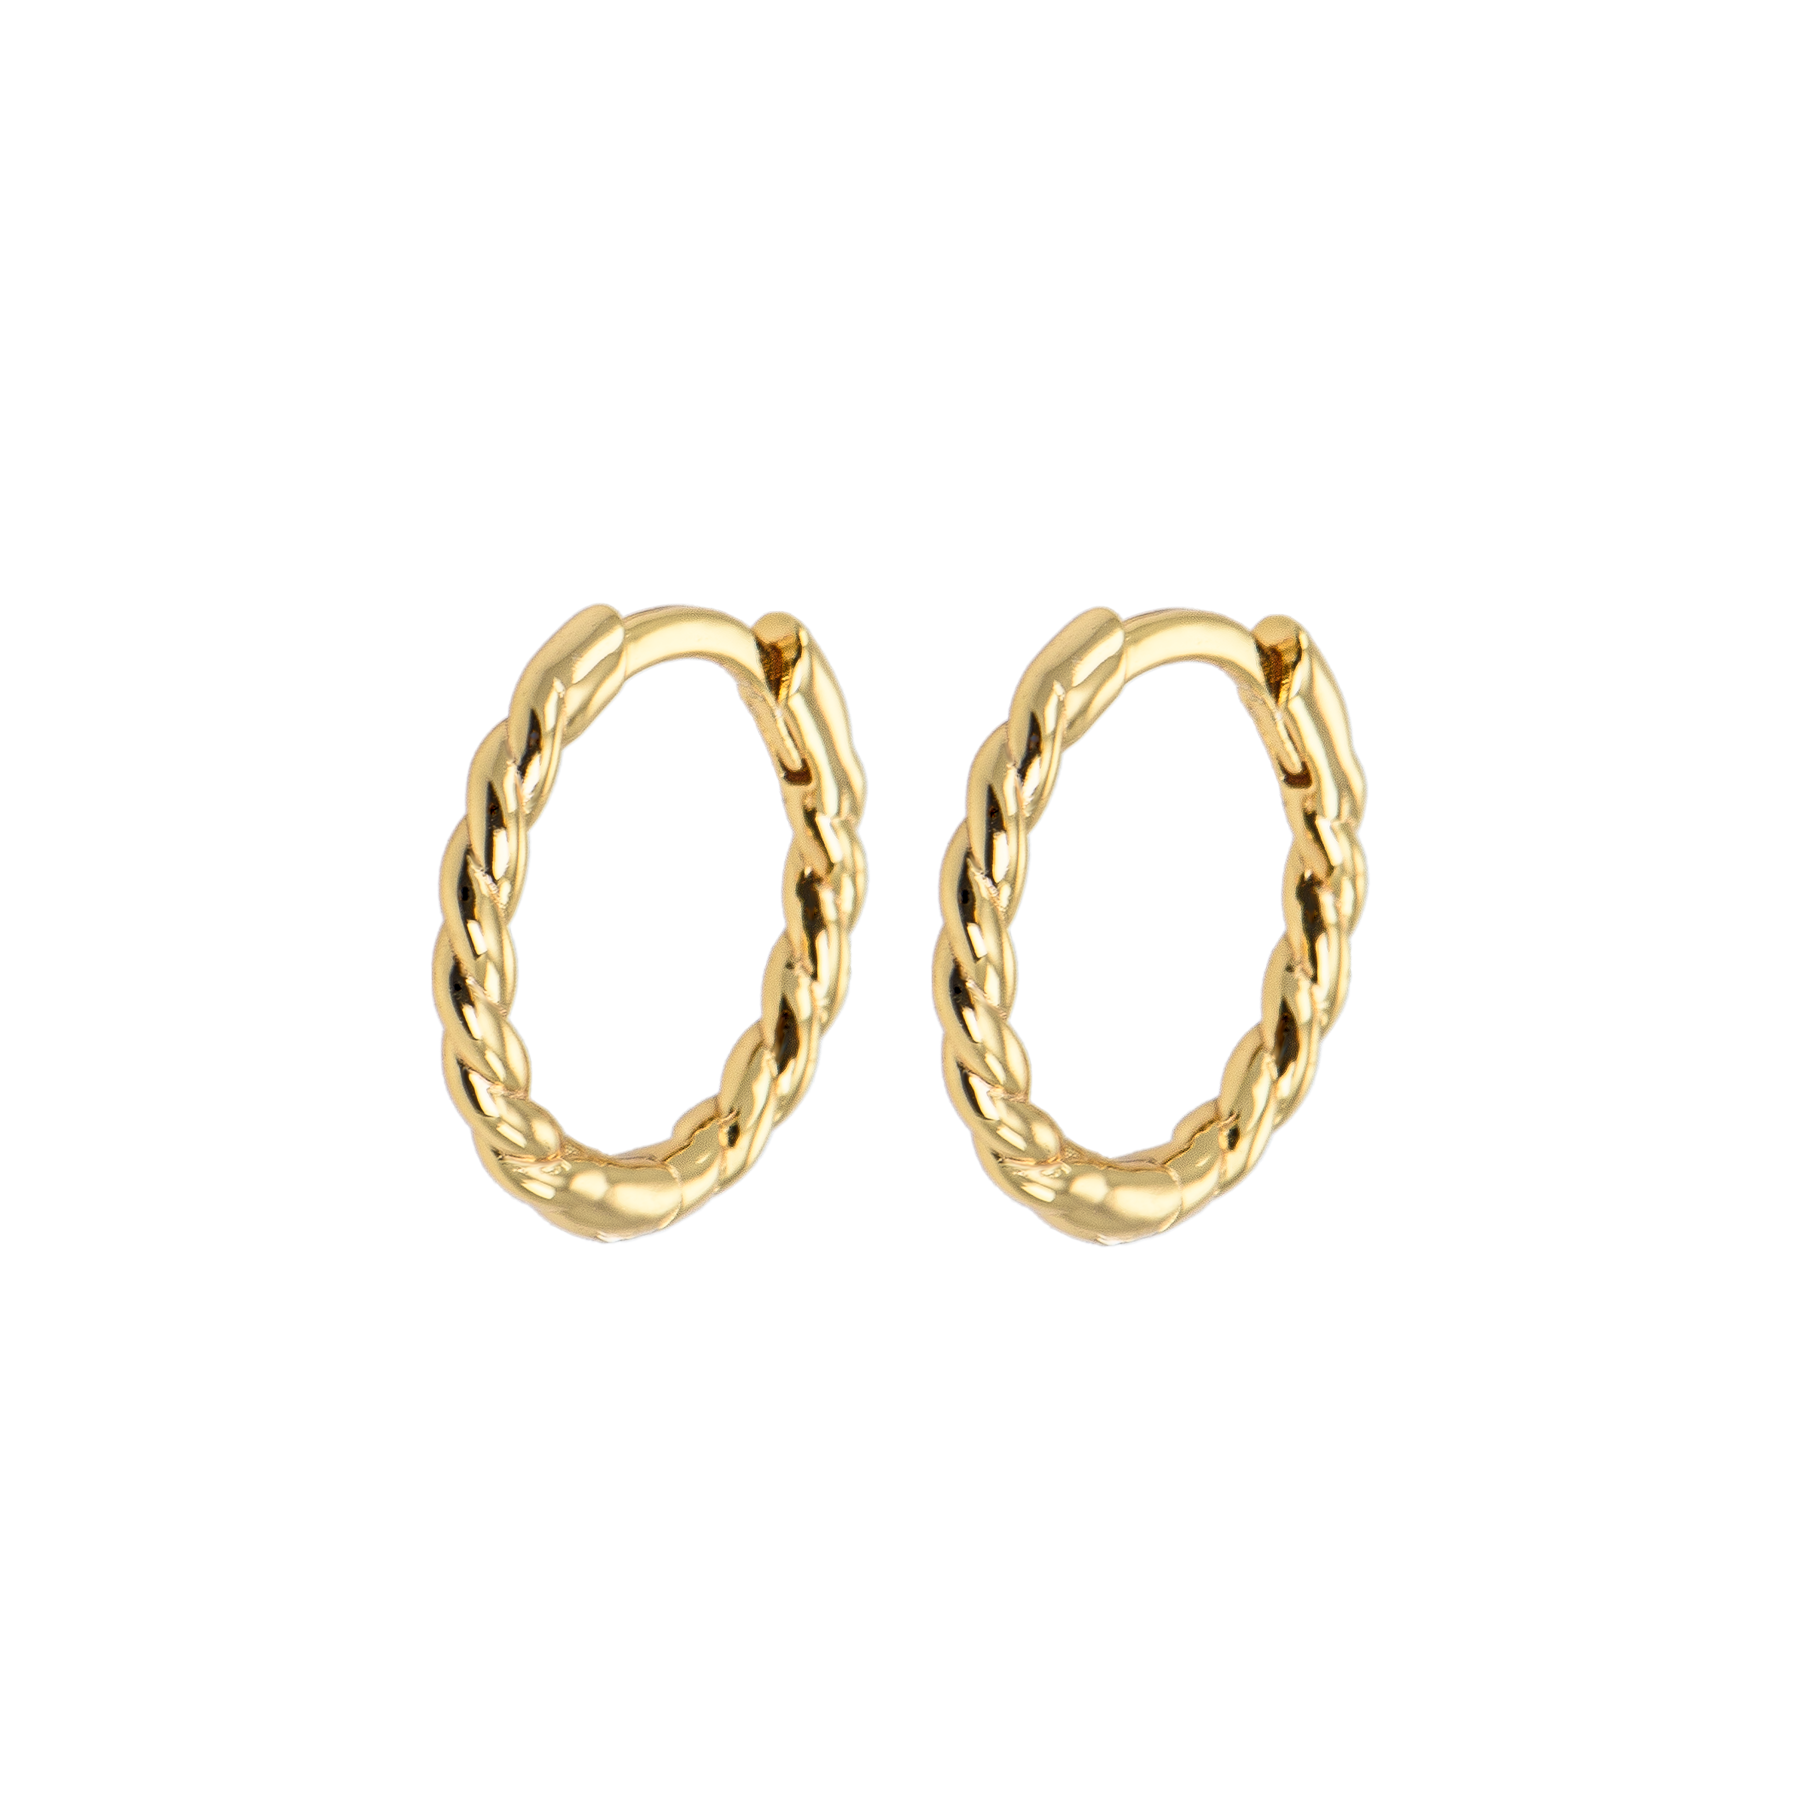 Image of Medium twisted hoops from Emilia by Bon Dep